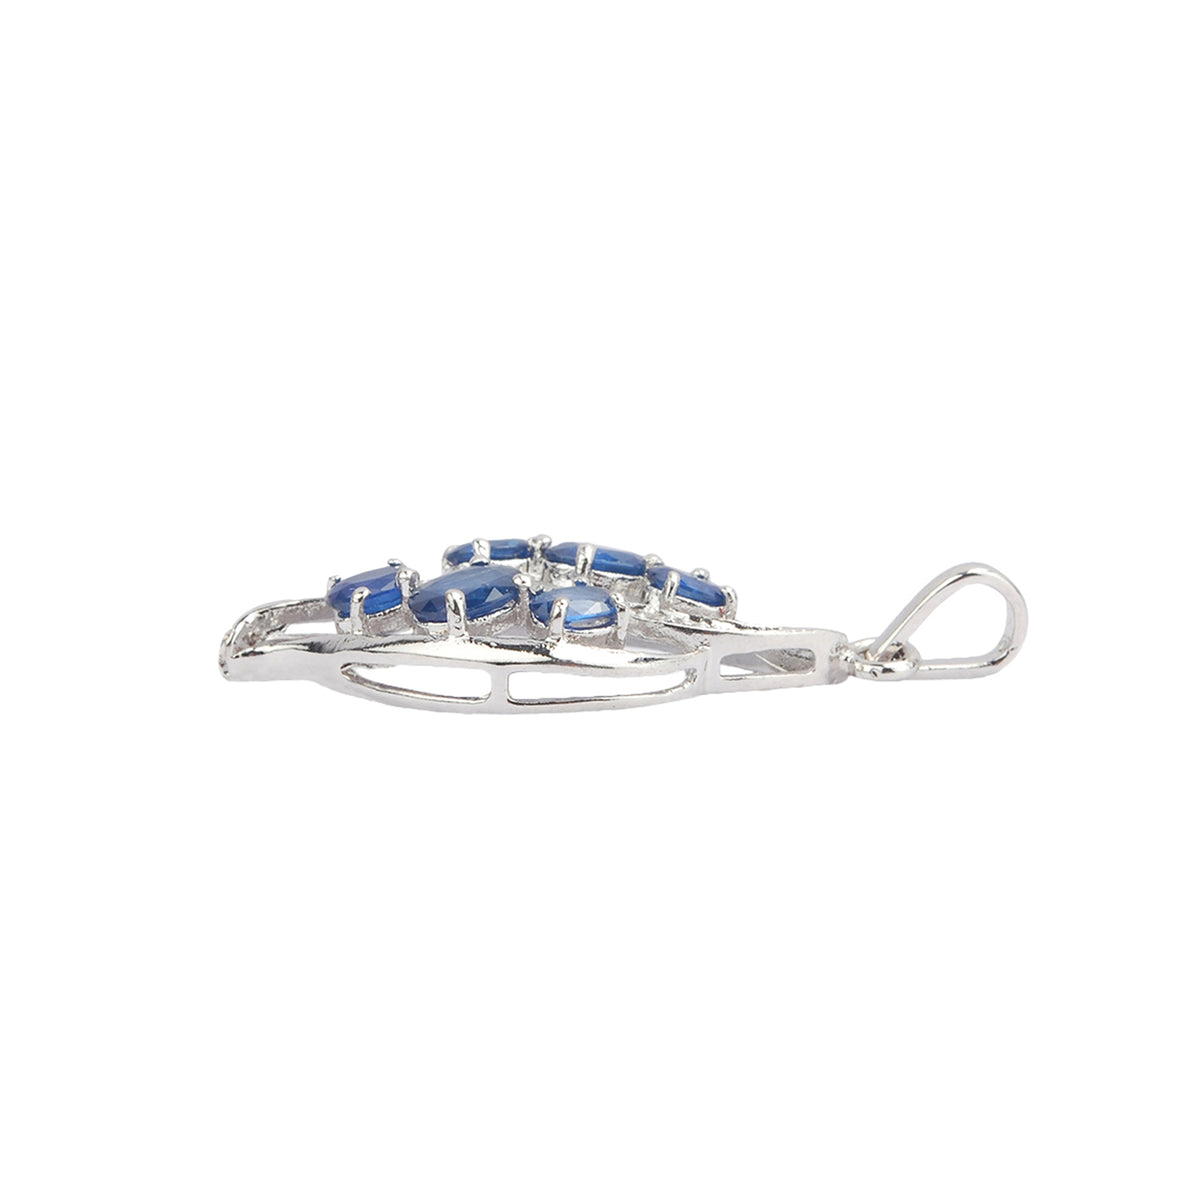 Pave diamonds and oval cut sapphire in silver leaf pendant